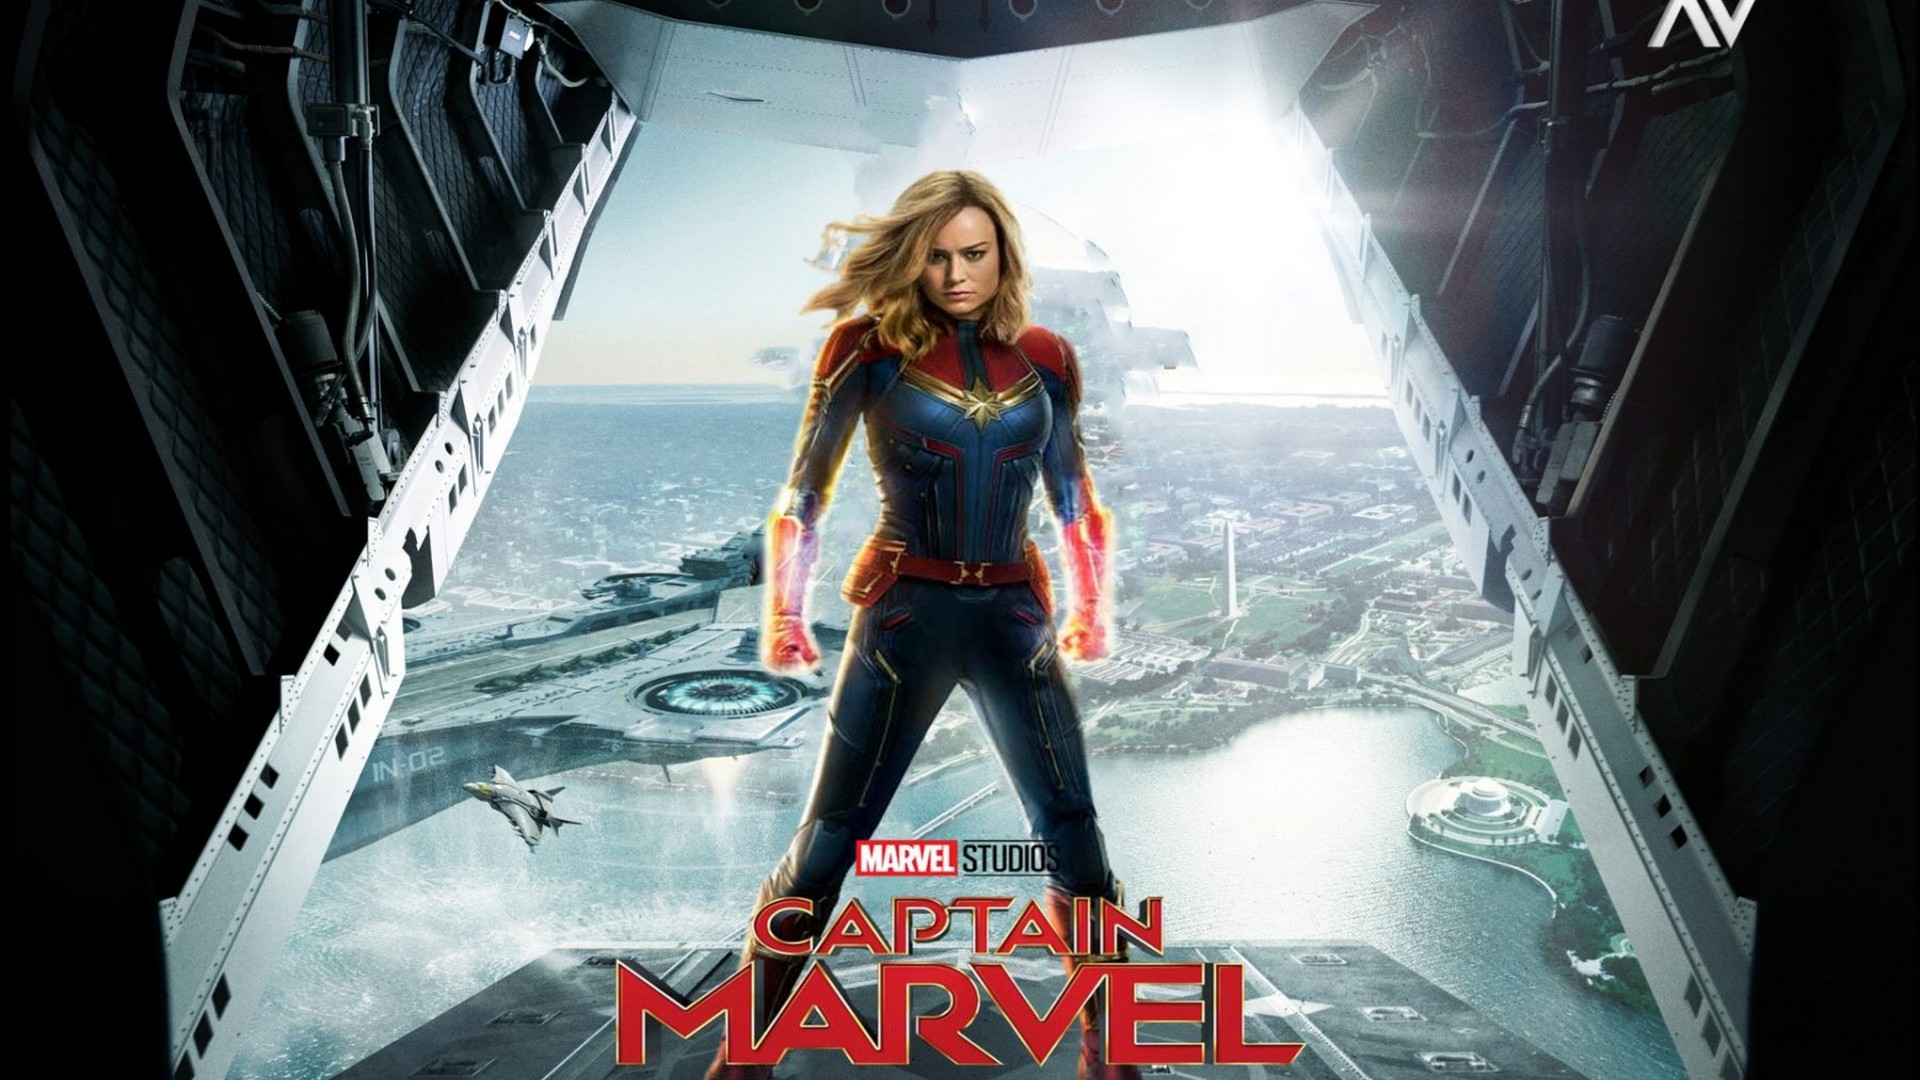 Captain Marvel Wallpaper For Desktop with high-resolution 1920x1080 pixel. You can use this poster wallpaper for your Desktop Computers, Mac Screensavers, Windows Backgrounds, iPhone Wallpapers, Tablet or Android Lock screen and another Mobile device